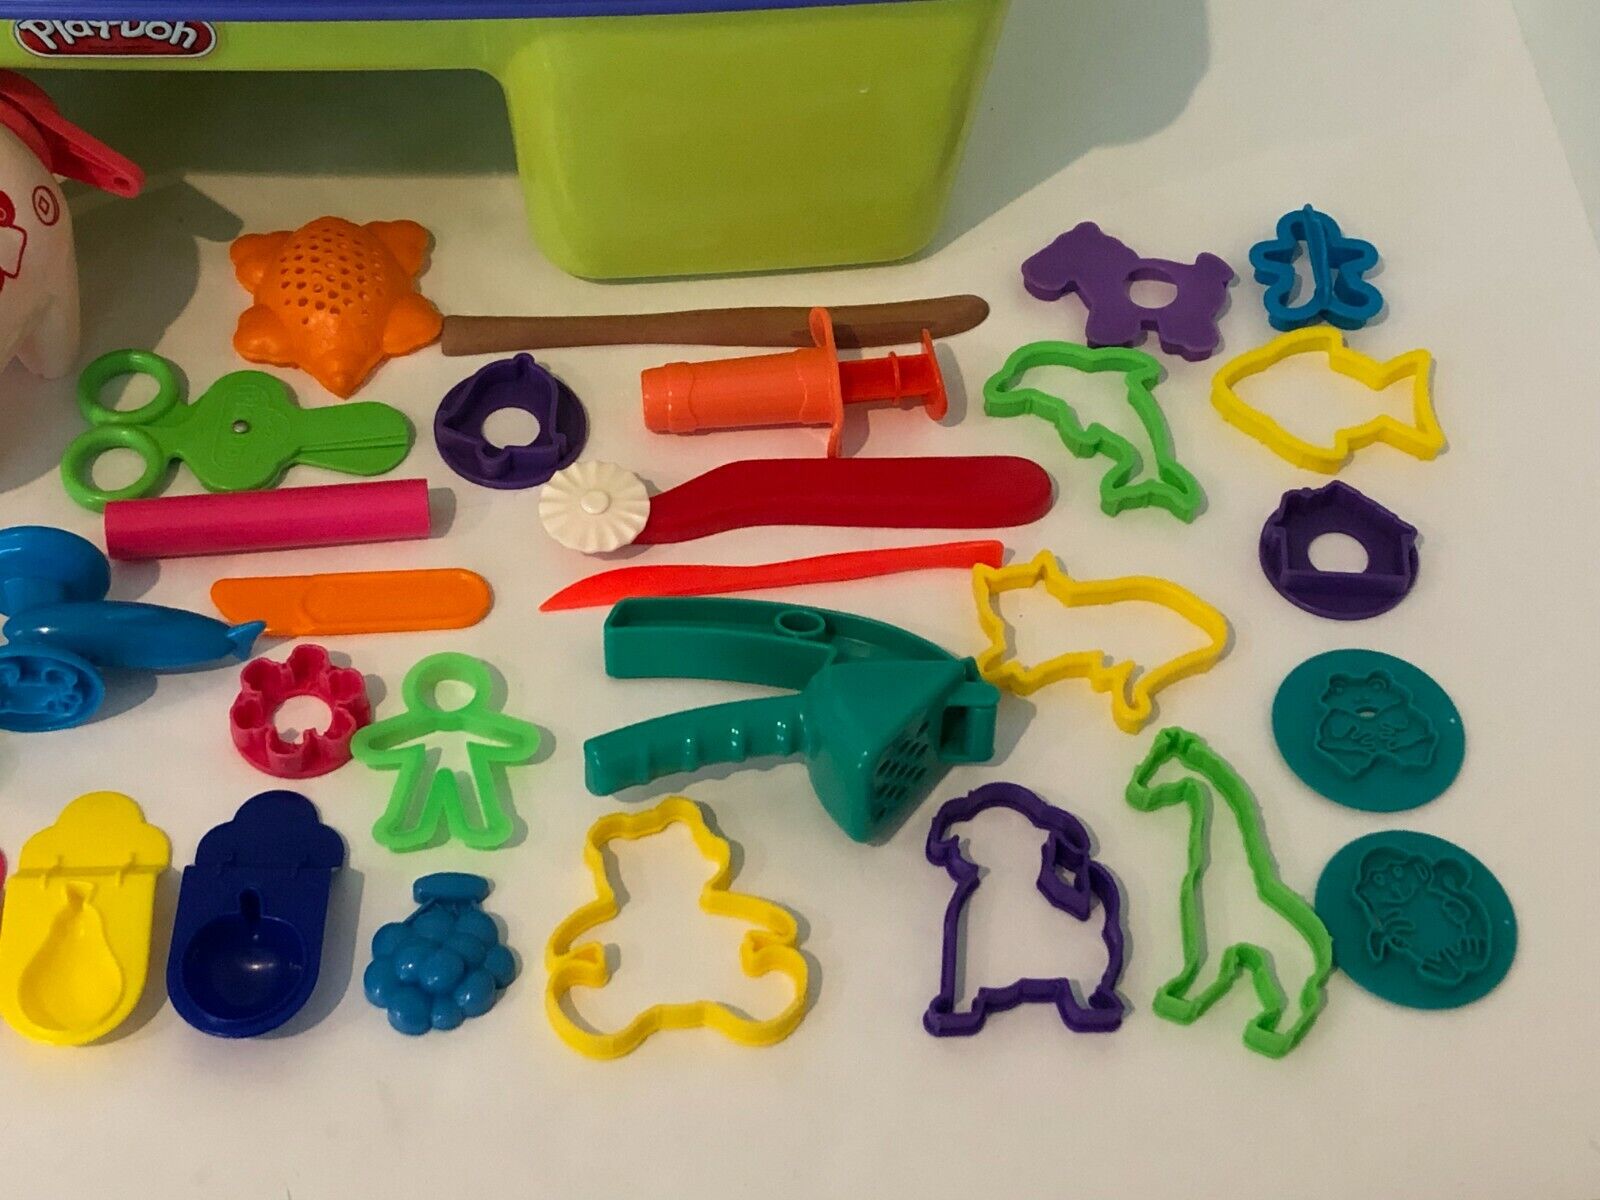 Play-Doh Activity Table Lap Desk Play N Store Storage Molds Cutters Tools  Set